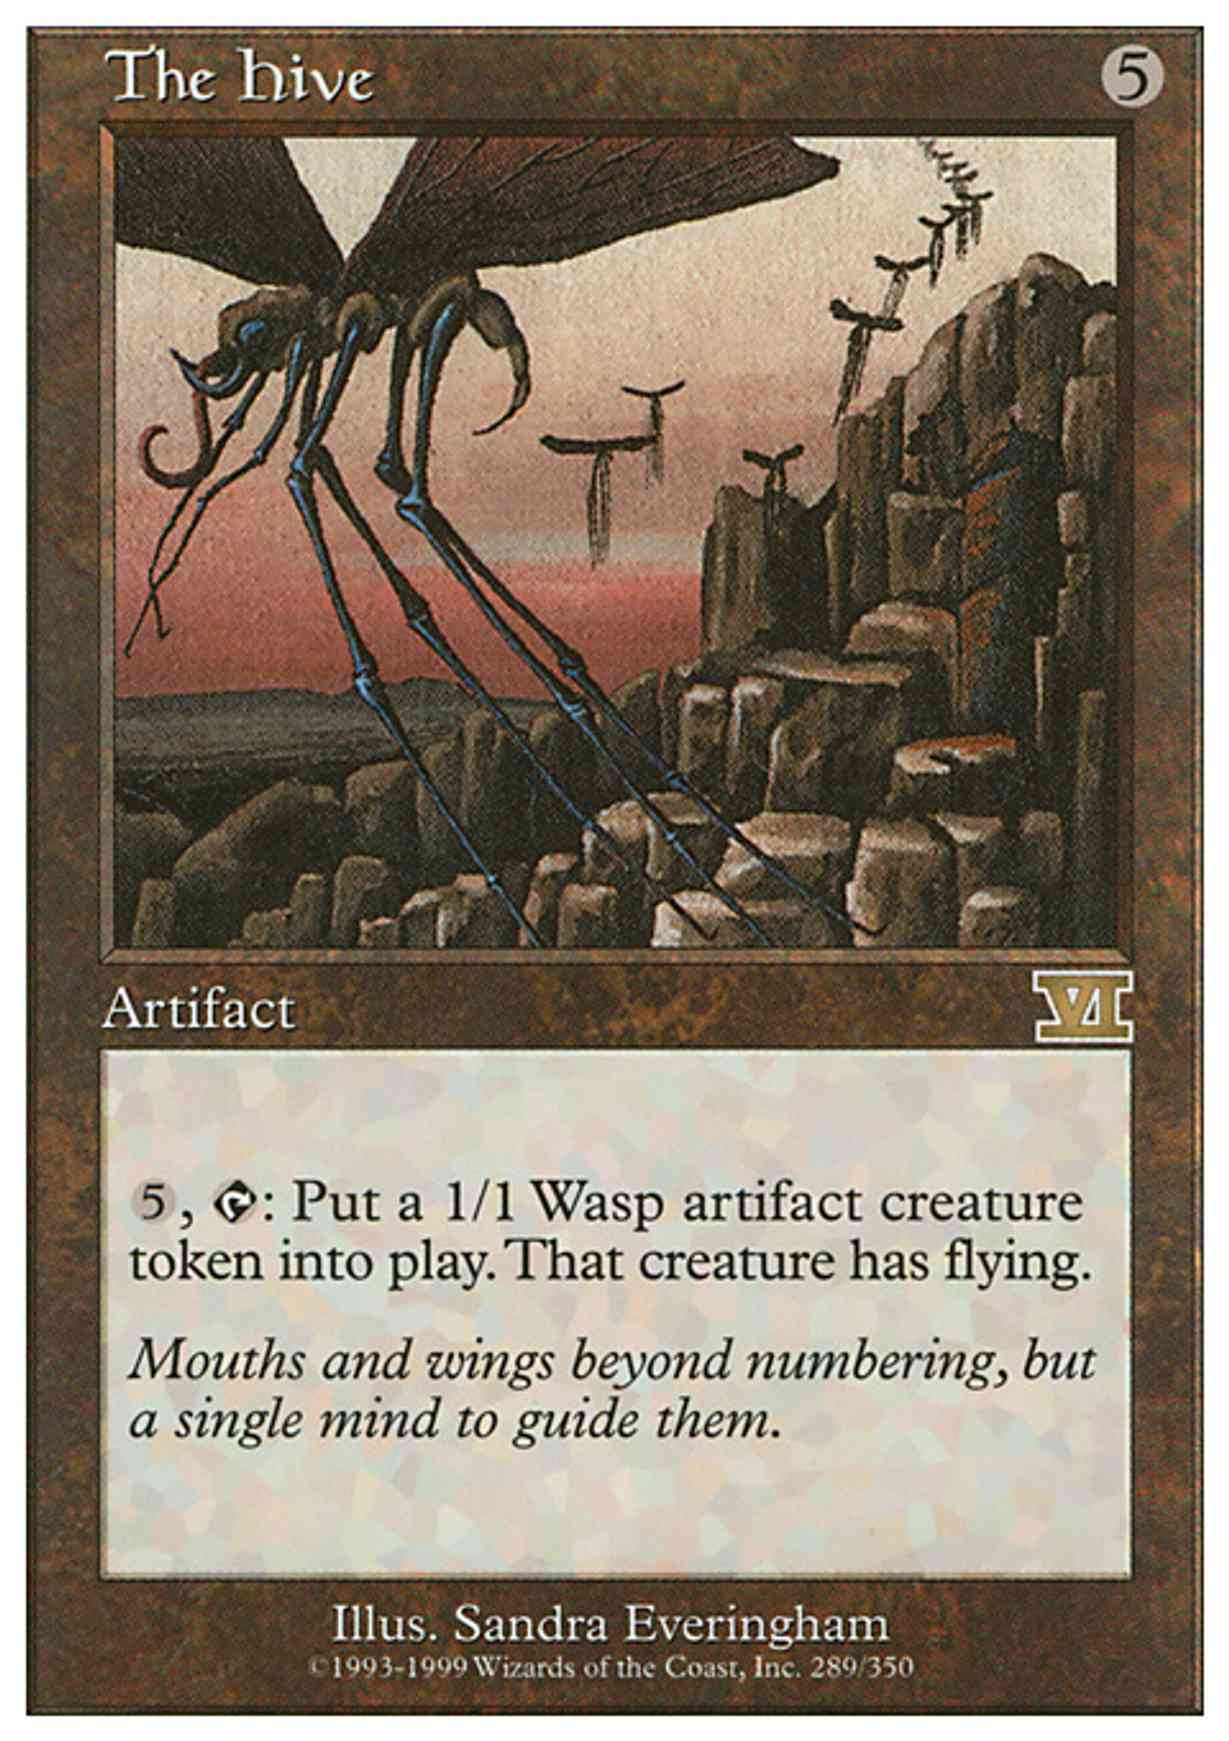 The Hive magic card front